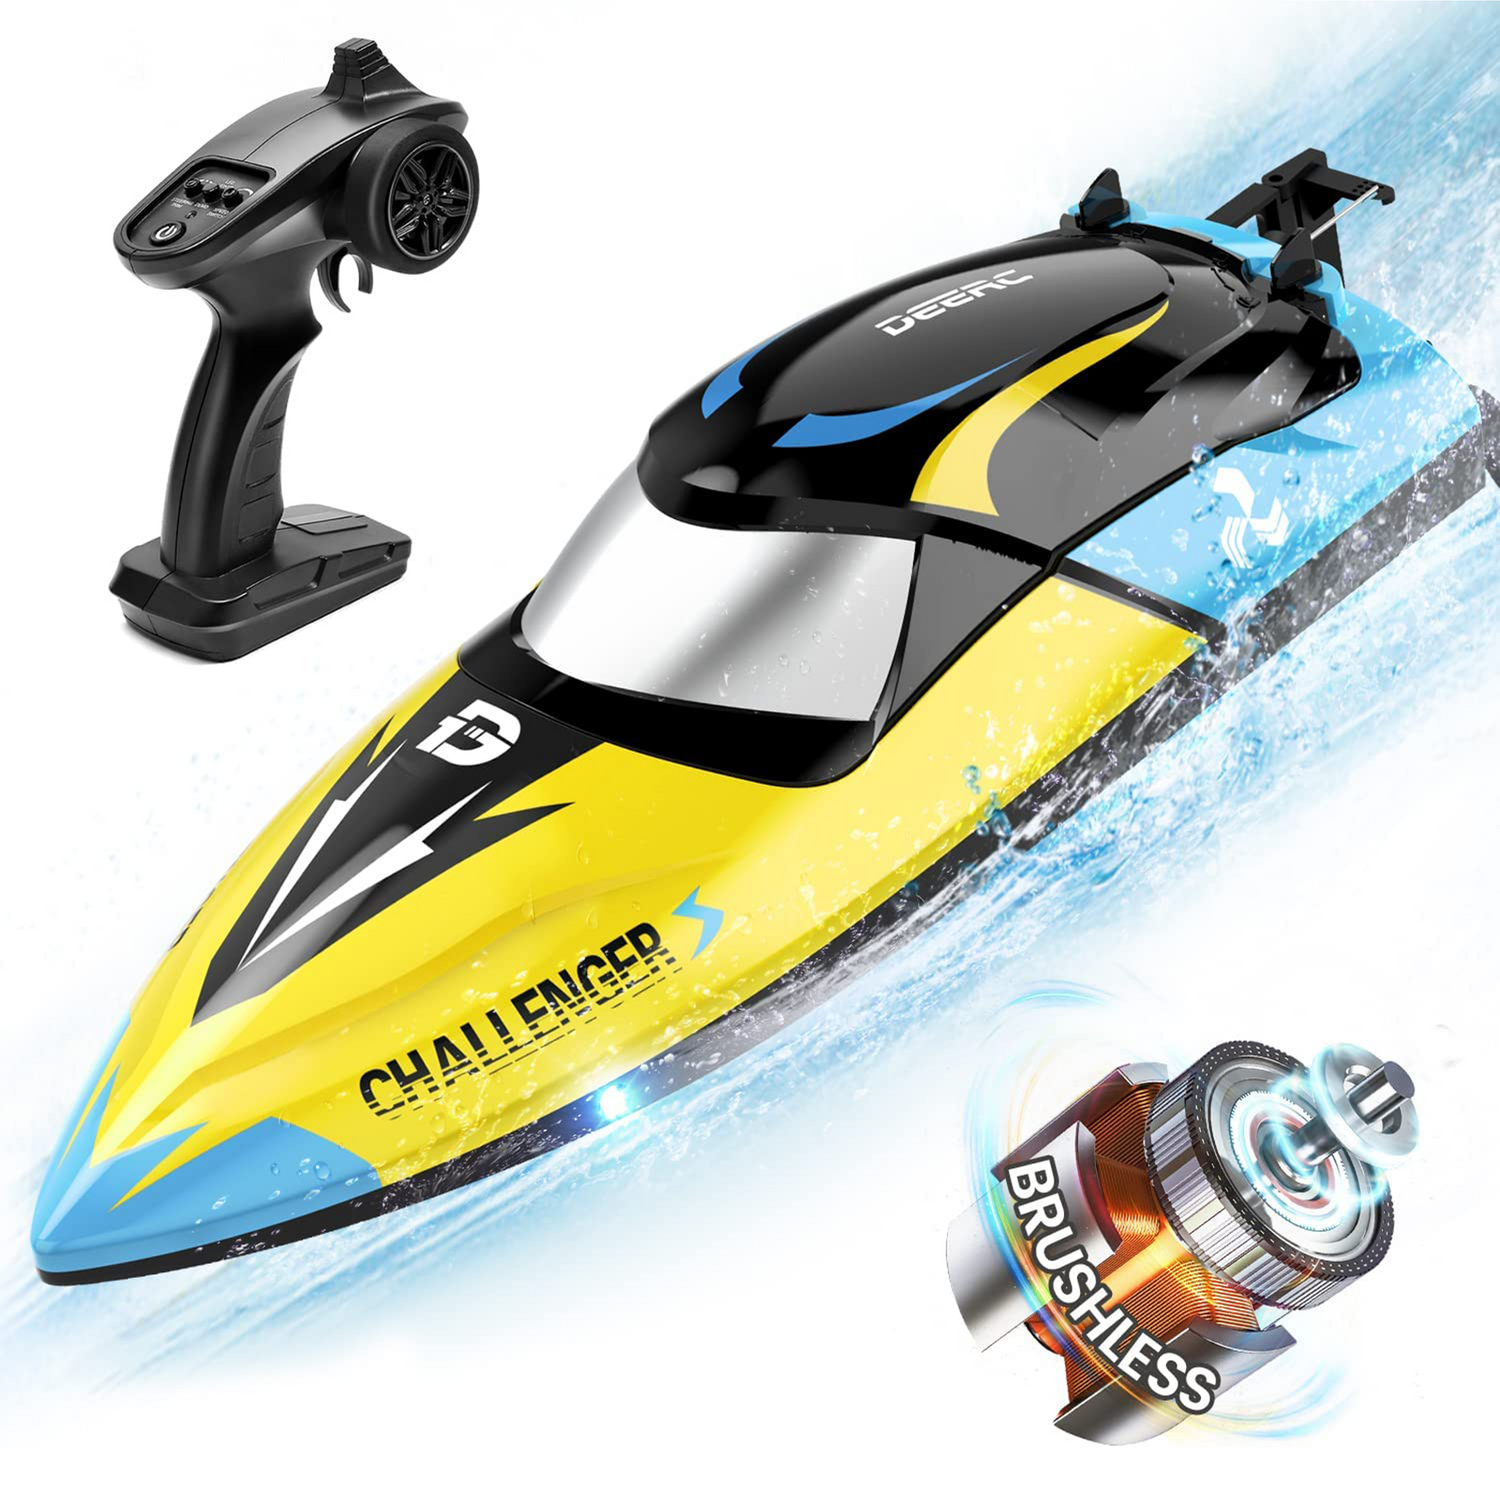 DEERC Brushless RC Boat Remote Control Boats 2.4GHz Racing LED Lights Pool Lake